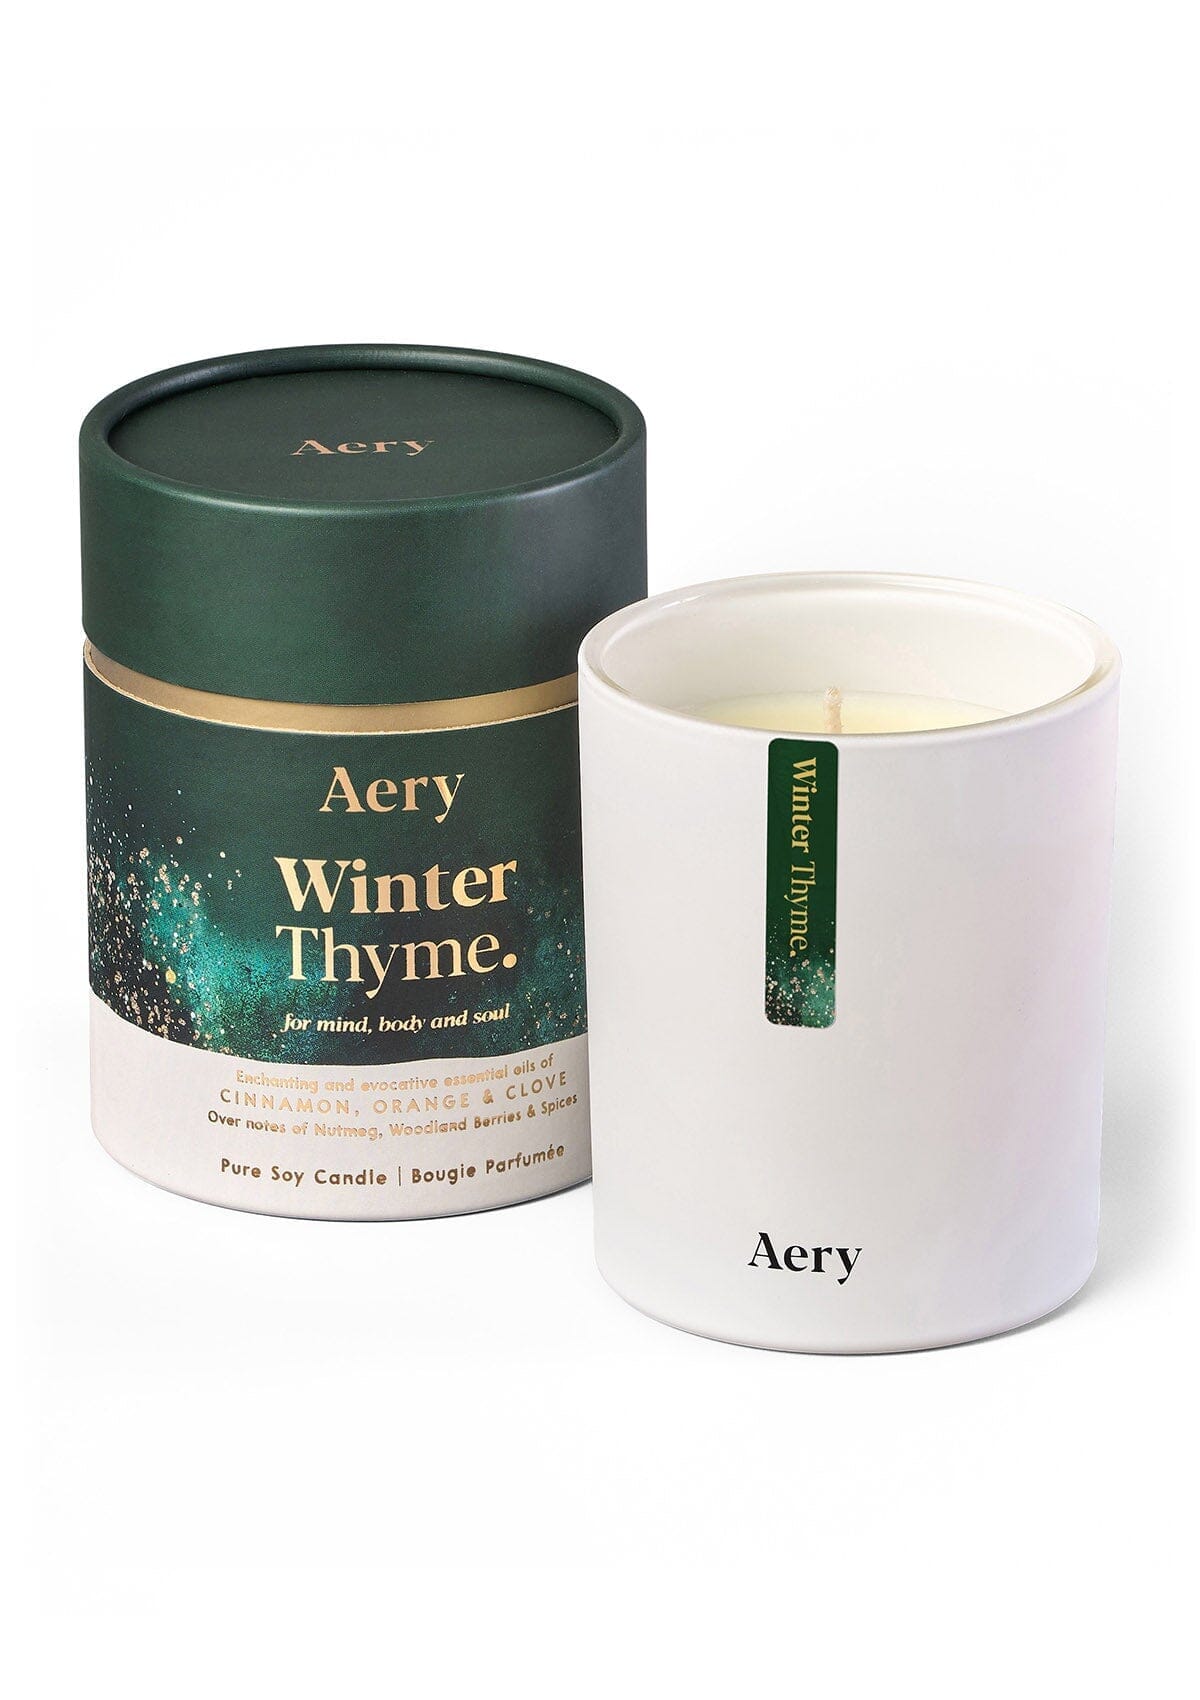 winter thyme christmas scented candle with decorative packaging